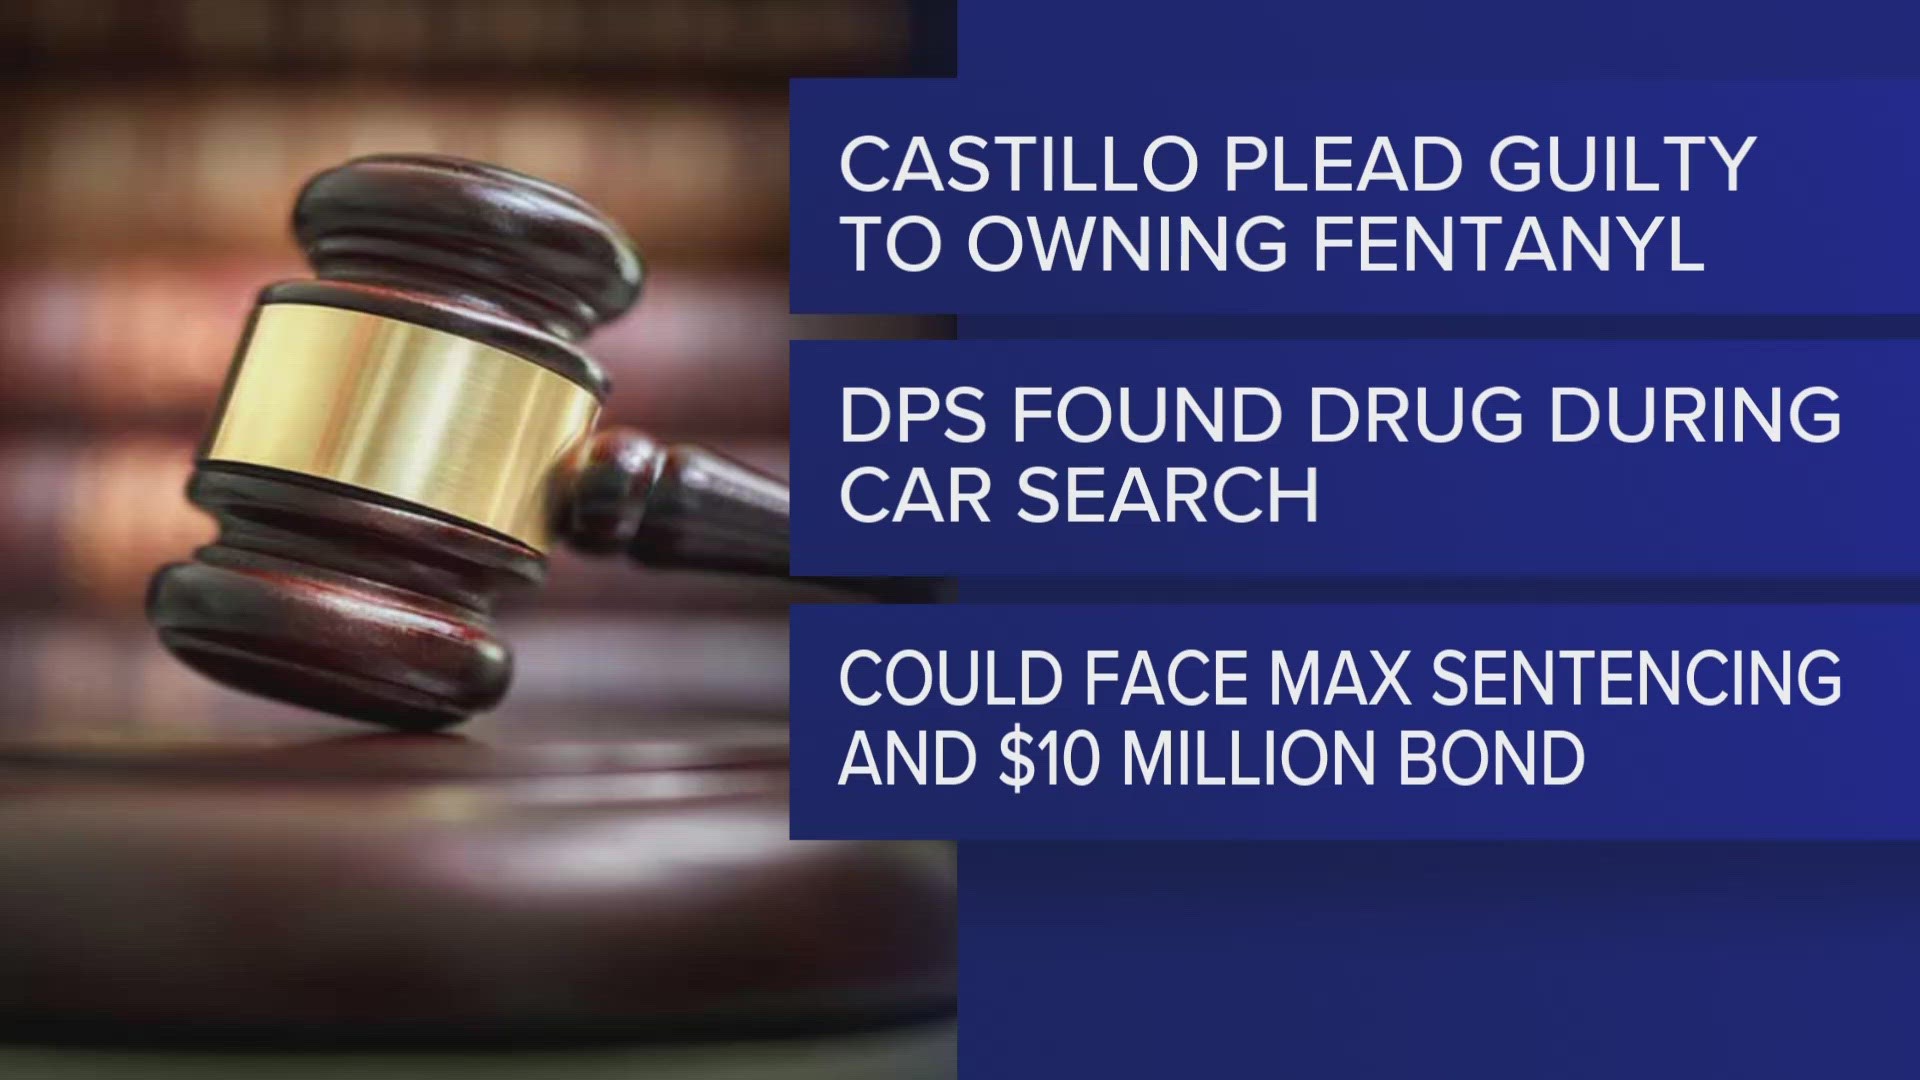 26-year-old Edgar Castillo could face a penalty of 10 years to life in prison with the maximum fine being $10 Million.